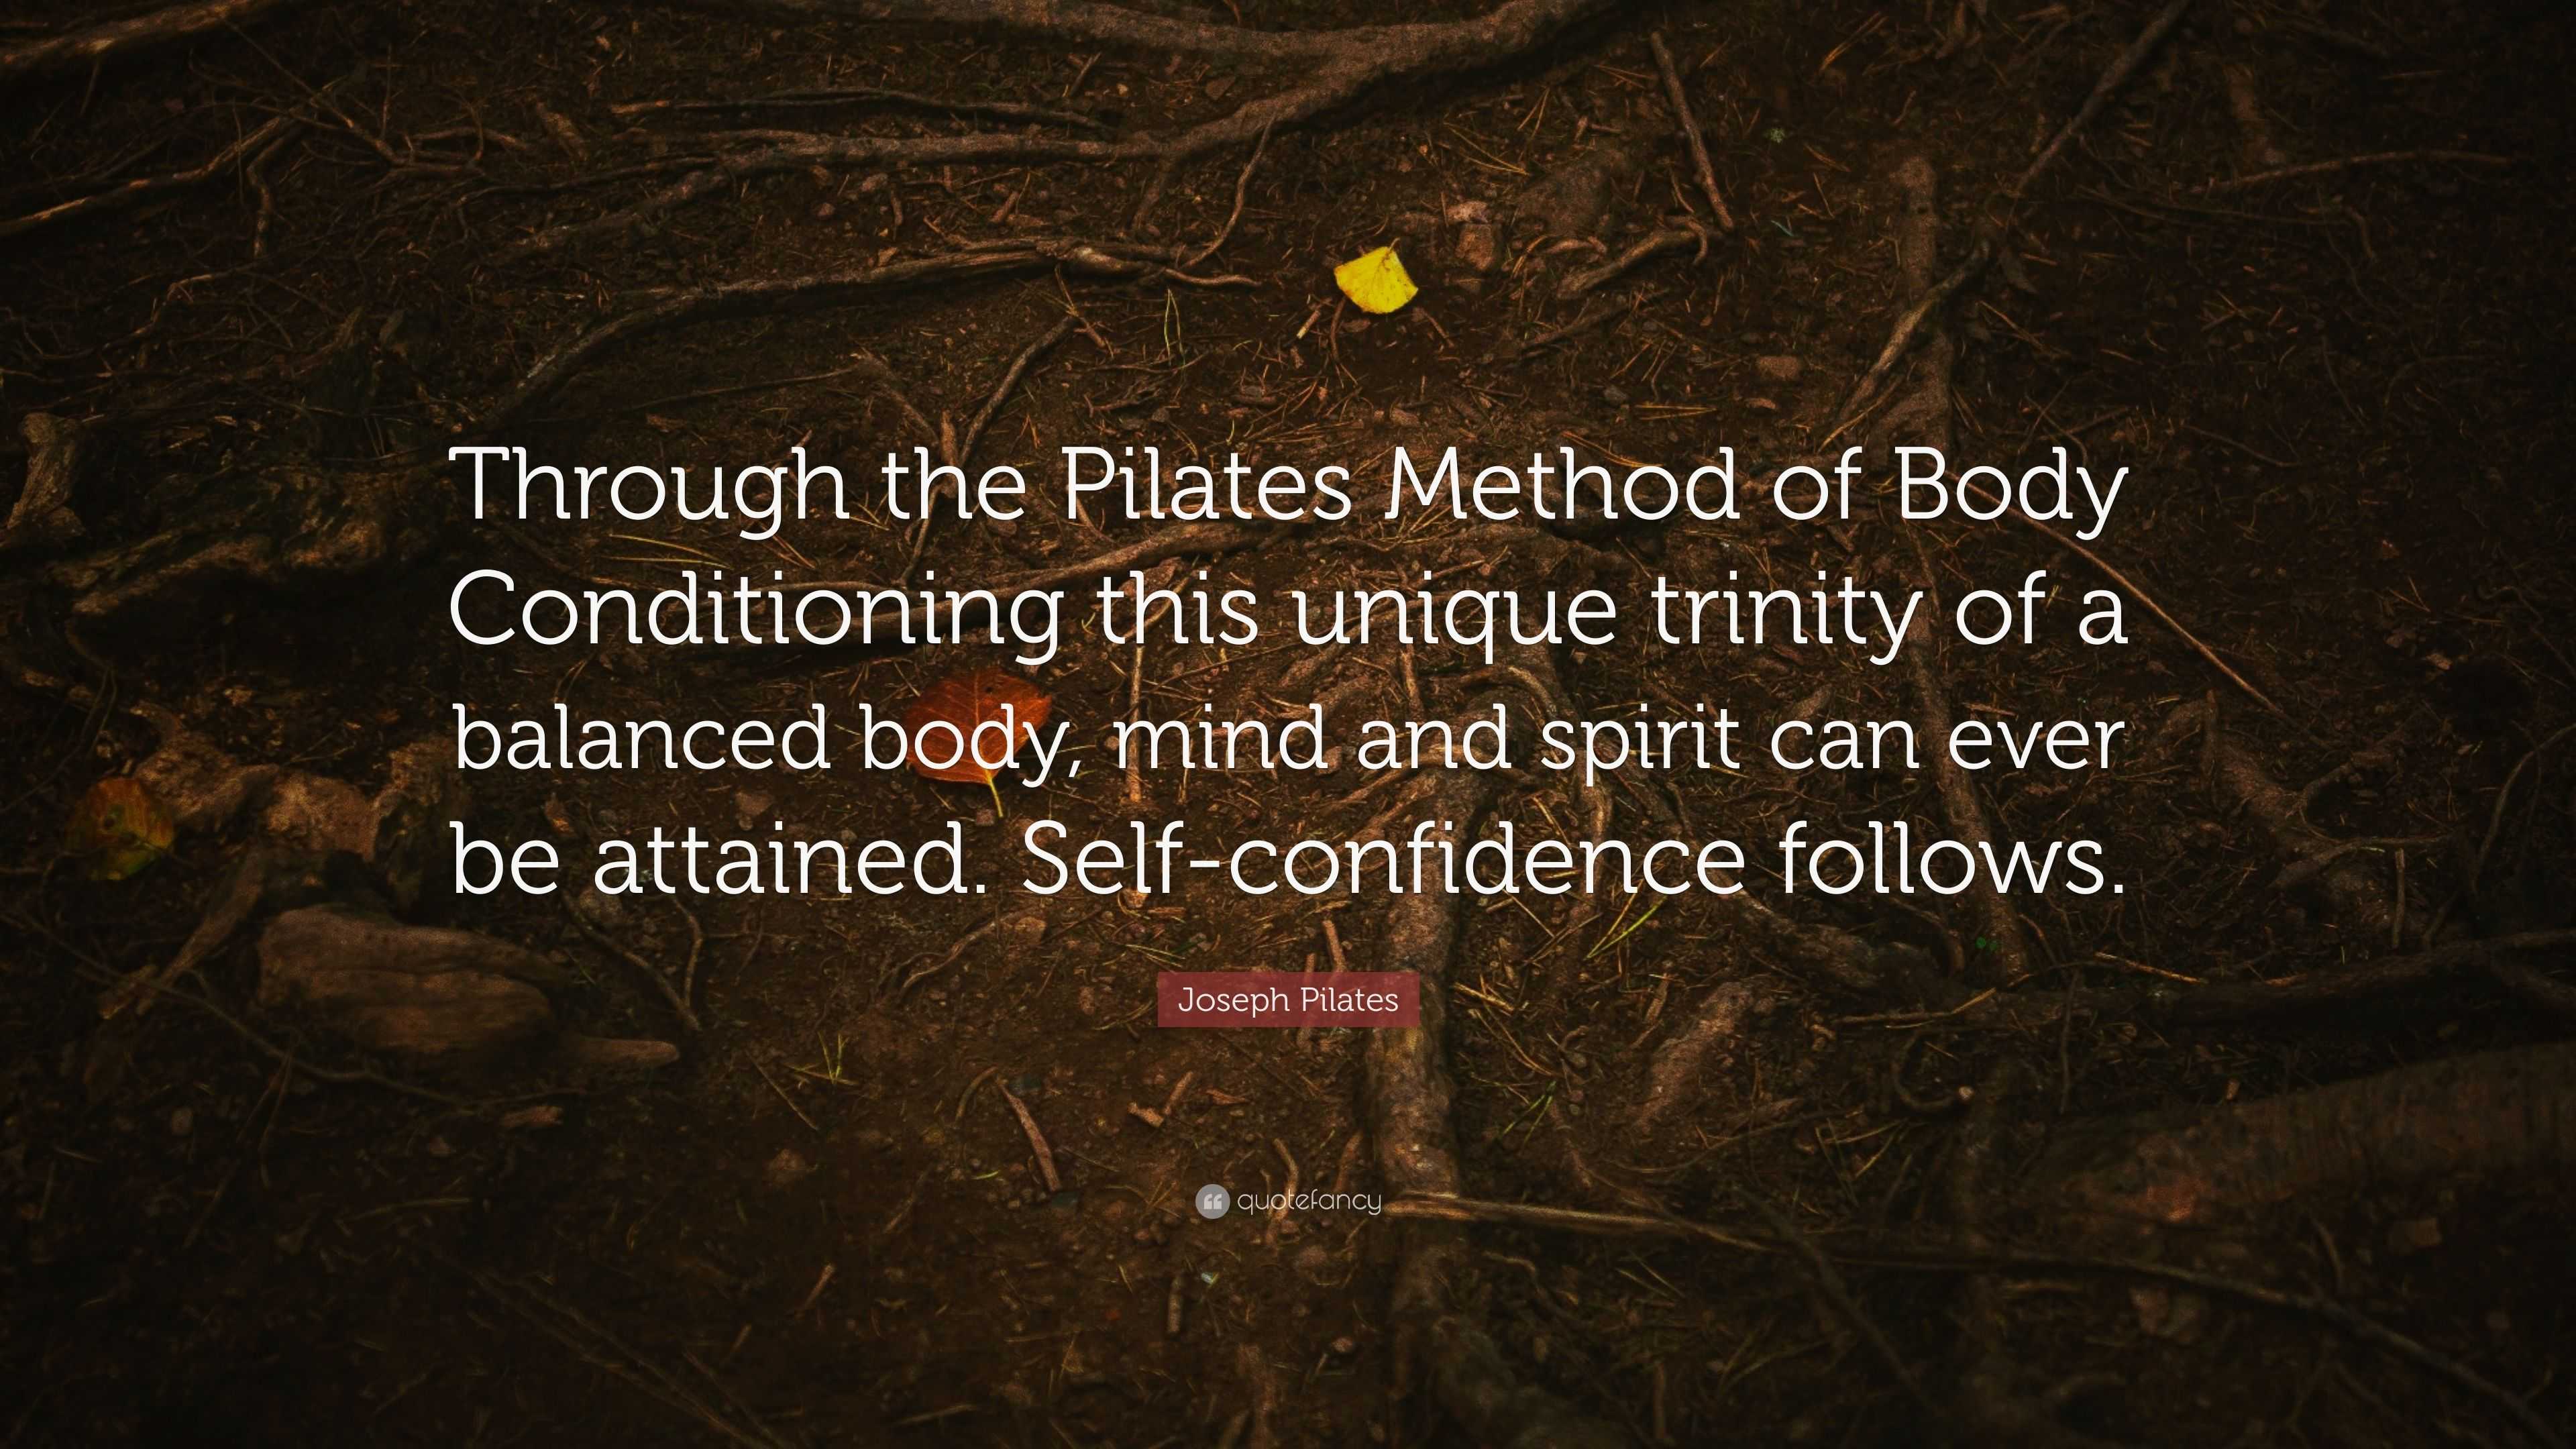 Bridge Pilates - This is one of my favourite quotes from Joseph Pilates! I  am sure if you ask anyone who practices Pilates regularly that they would  say this quote is true.